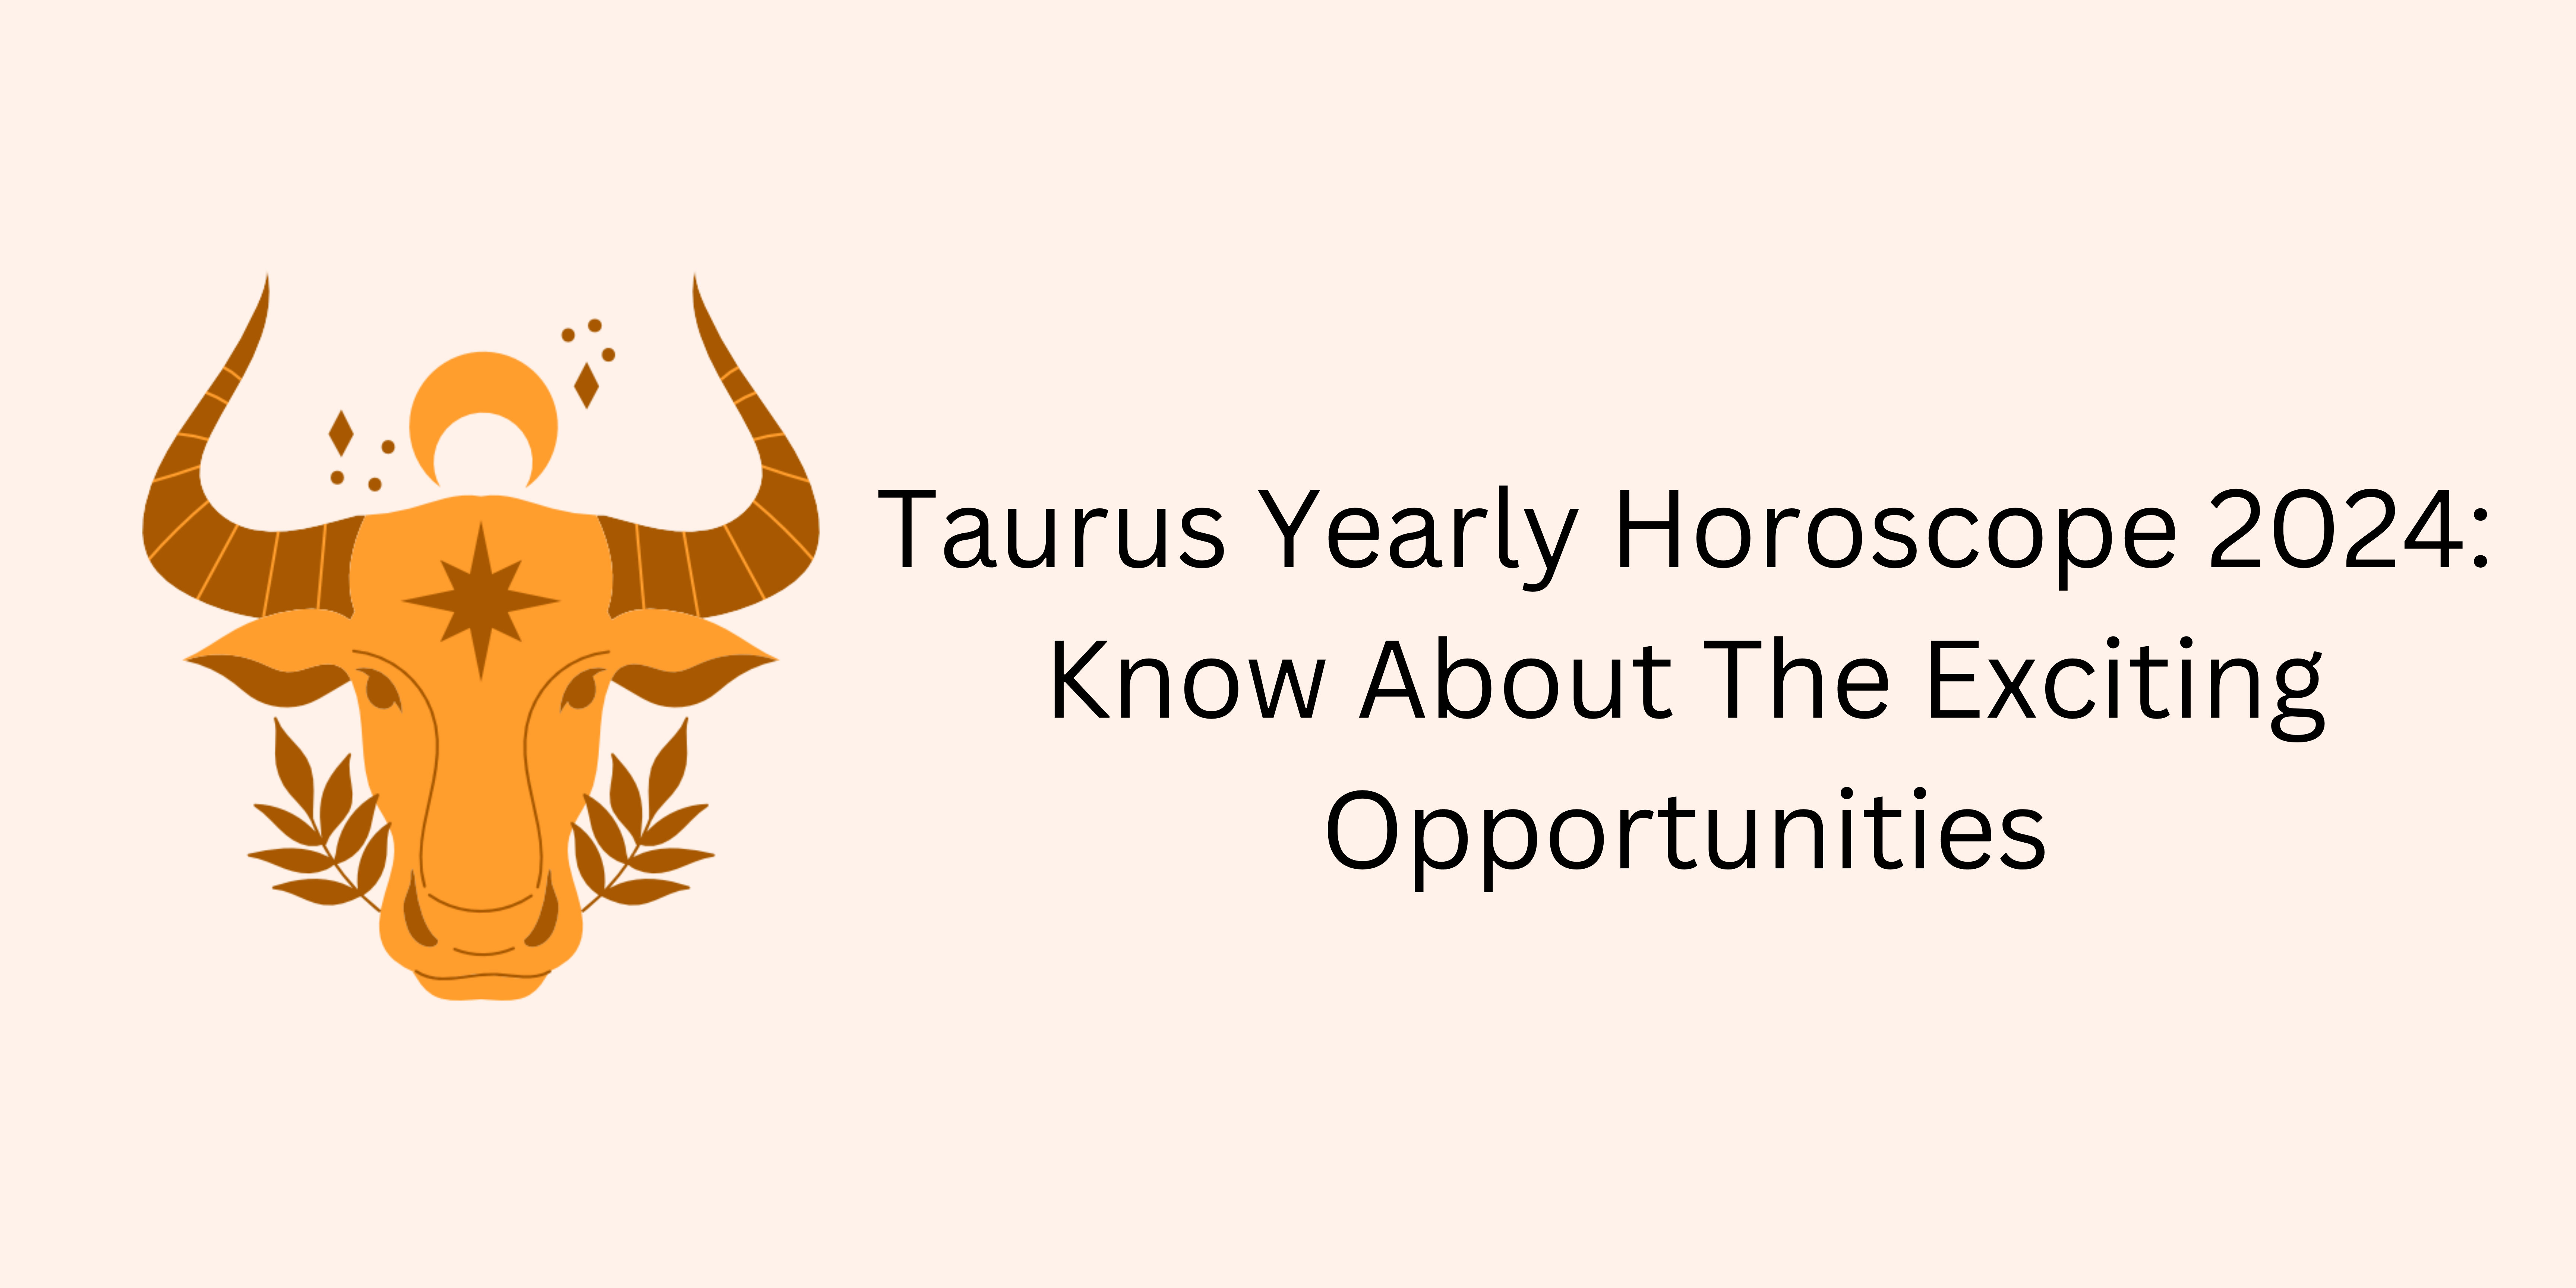 Taurus Yearly Horoscope 2024: Know About The Exciting Opportunities